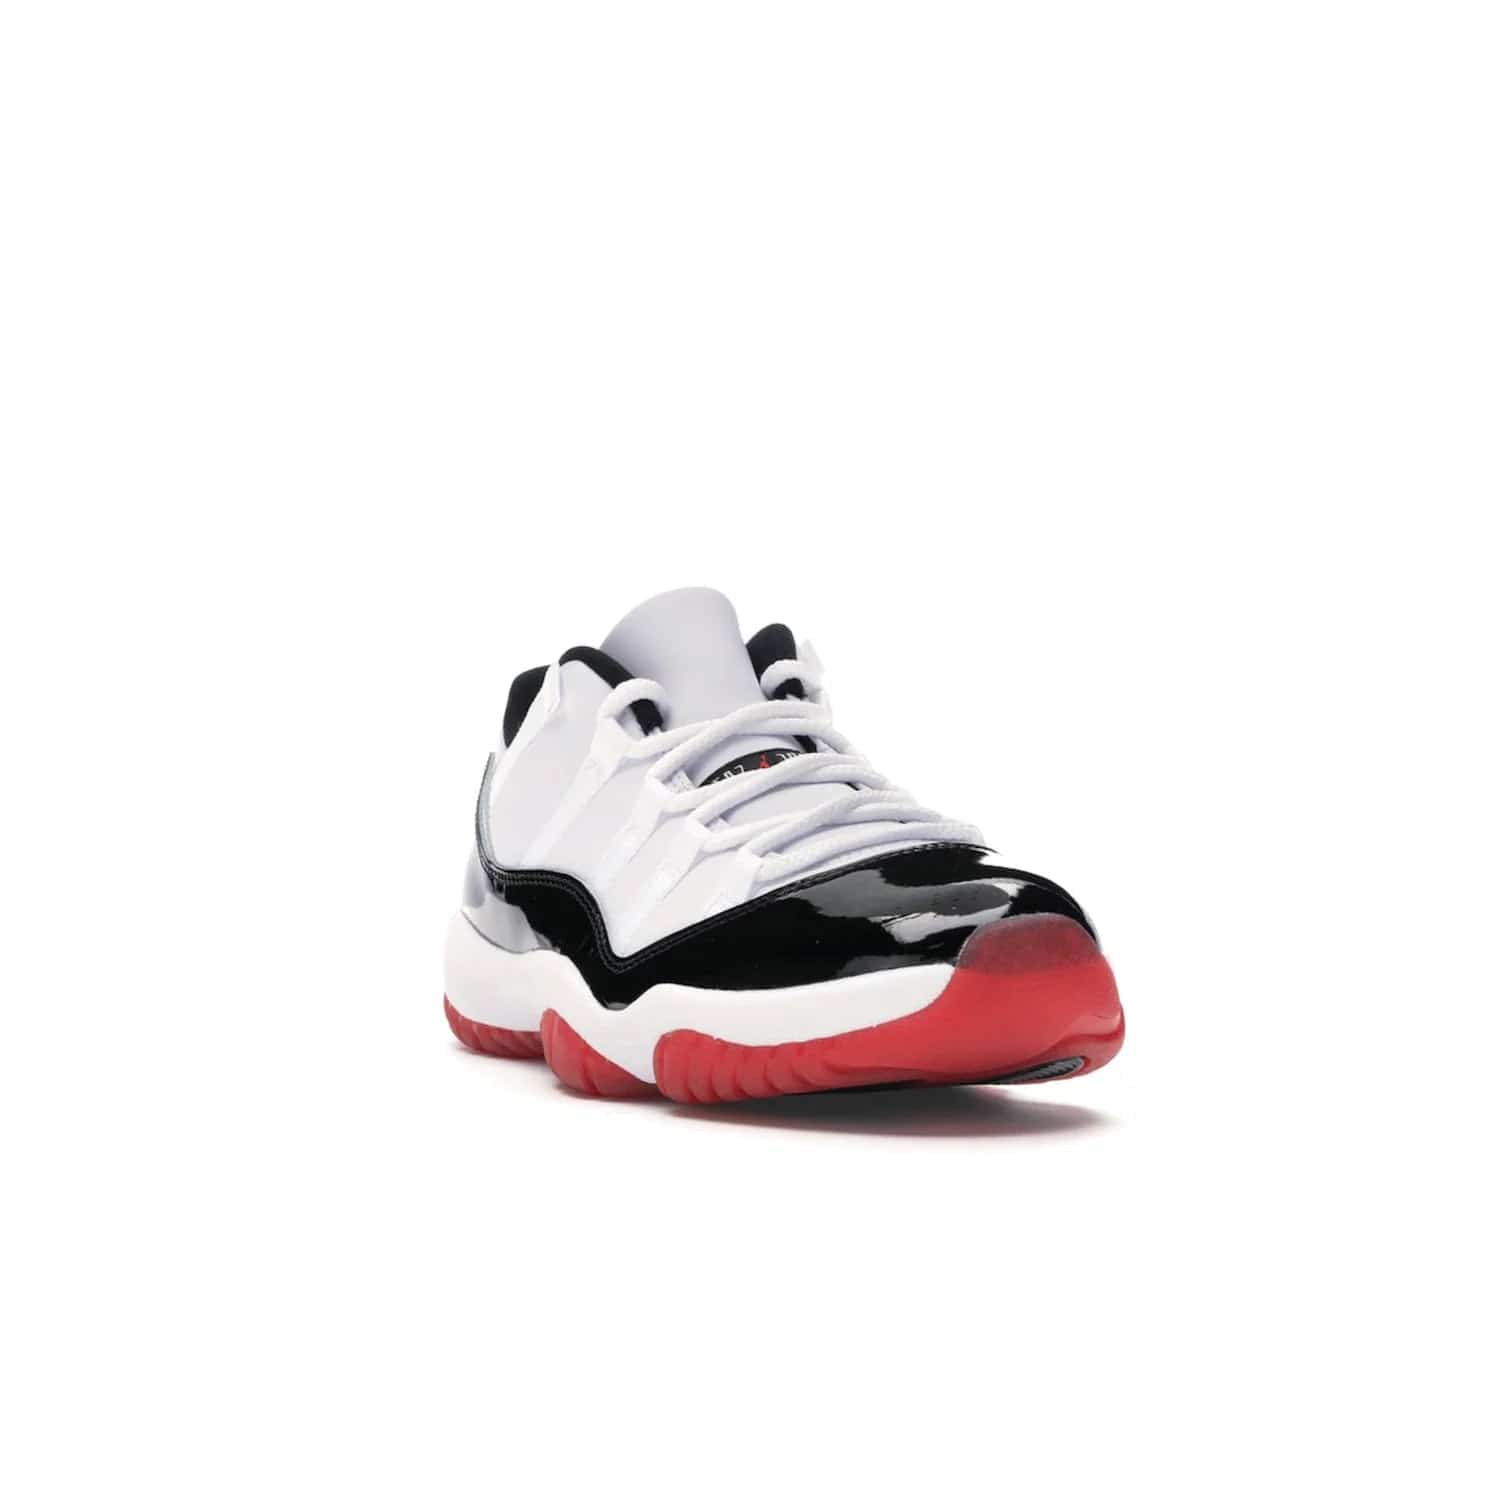 Jordan 11 Retro Low Concord Bred - Image 7 - Only at www.BallersClubKickz.com - Grab the classic Jordan 11 look with the Jordan 11 Retro Low Concord Bred. With white and black elements and the iconic red outsole of the Jordan 11 Bred, you won't miss a beat. Released in June 2020, the perfect complement to any outfit.